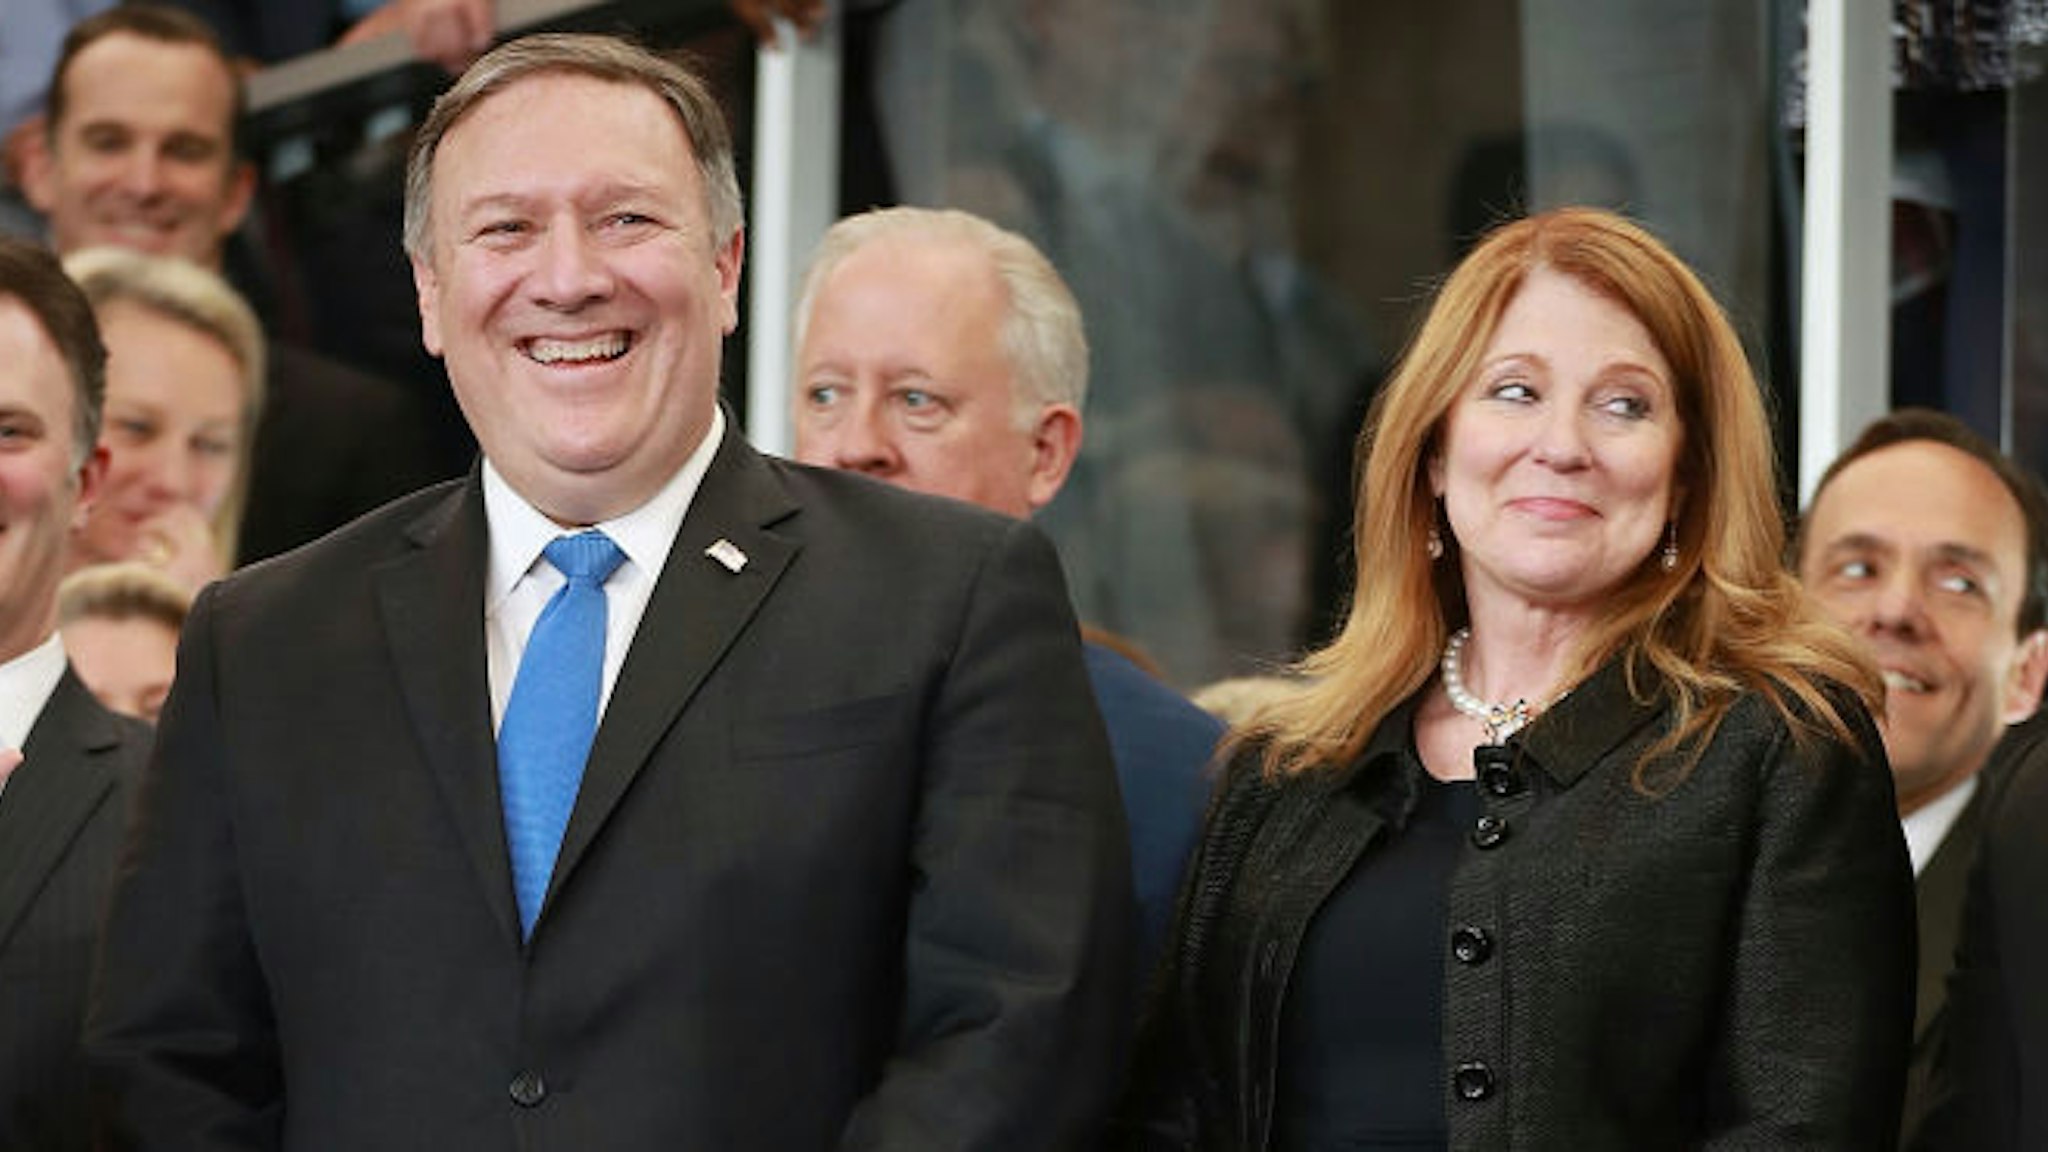 WASHINGTON, DC - MAY 01: U.S. Secretary of State Mike Pompeo (L) and his wife Susan Pompeo are welcomed to the State Department during a ceremony in the lobby of the Harry S. Truman Building May 1, 2018 in Washington, DC. Serving as director of the Central Intelligence Agency until he was sworn in as Secretary of State on April 26, Pompeo traveled to Israel, Jordan and Saudi Arabia before coming to State Department headquarters on Tuesday. (Photo by Chip Somodevilla/Getty Images)